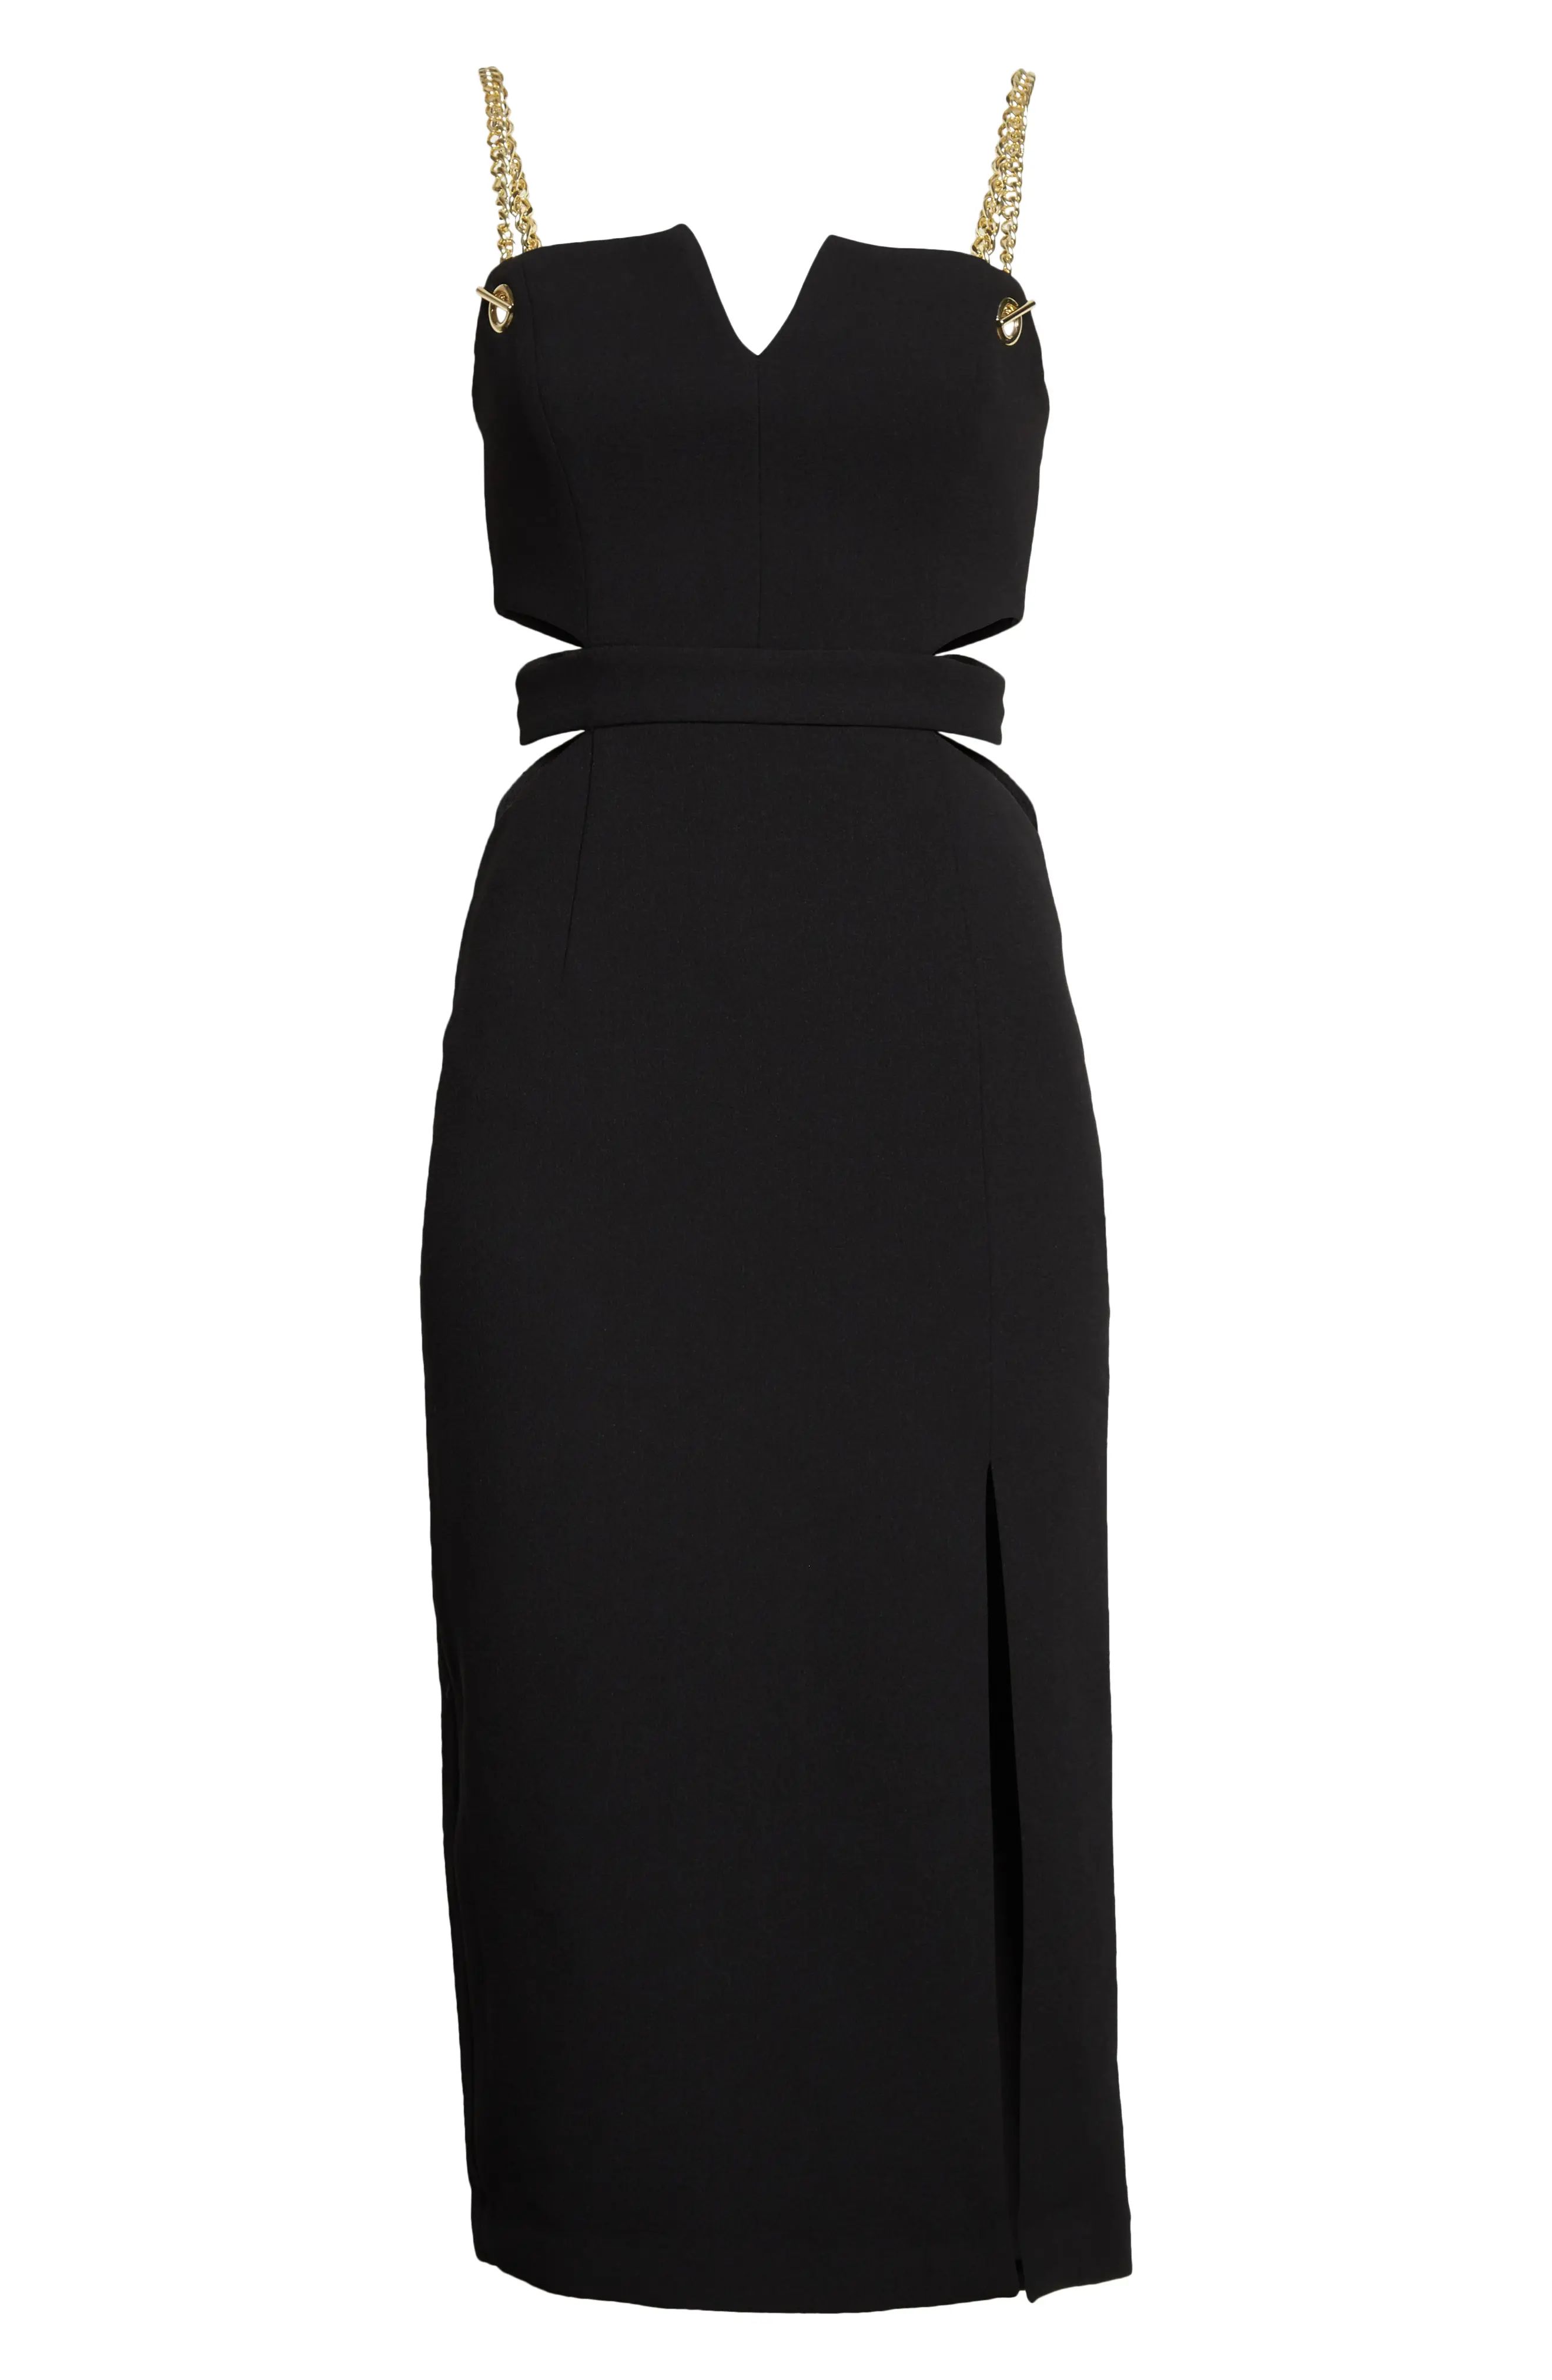 REBECCA VALLANCE Iman Cutout Chain Strap Dress in Black at Nordstrom, Size 2 Us | Nordstrom